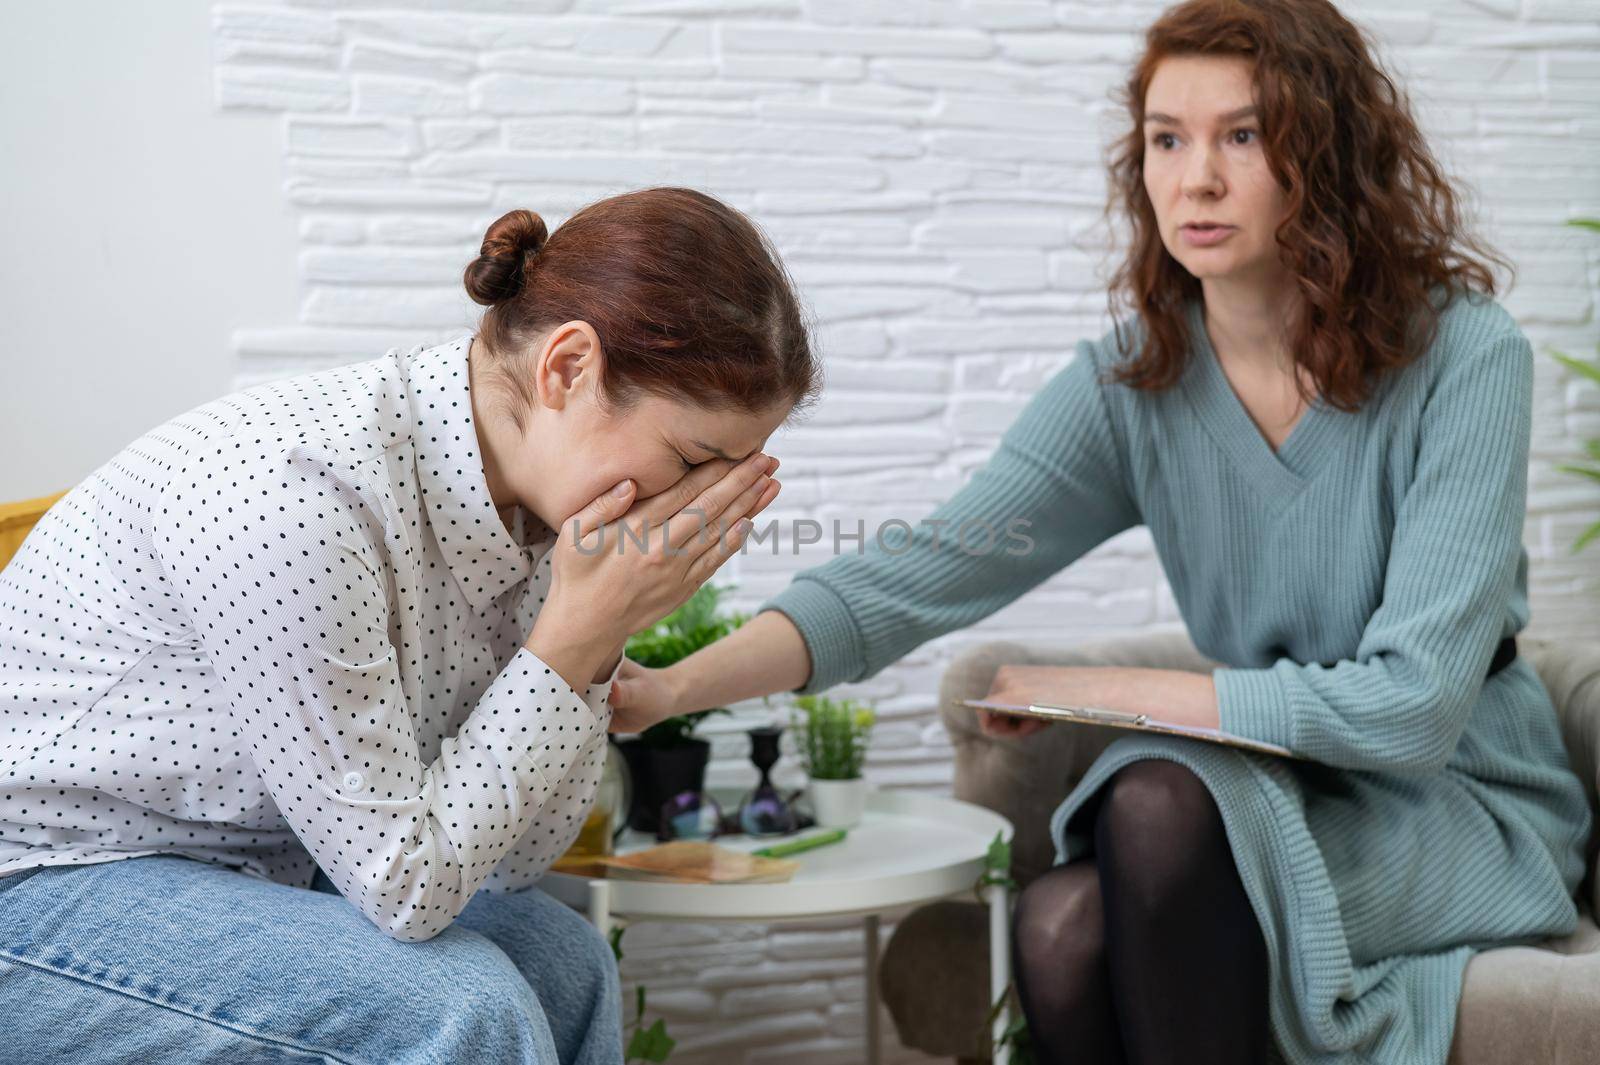 Caucasian woman crying at psychotherapy session. The female doctor calms the patient and holds her hand